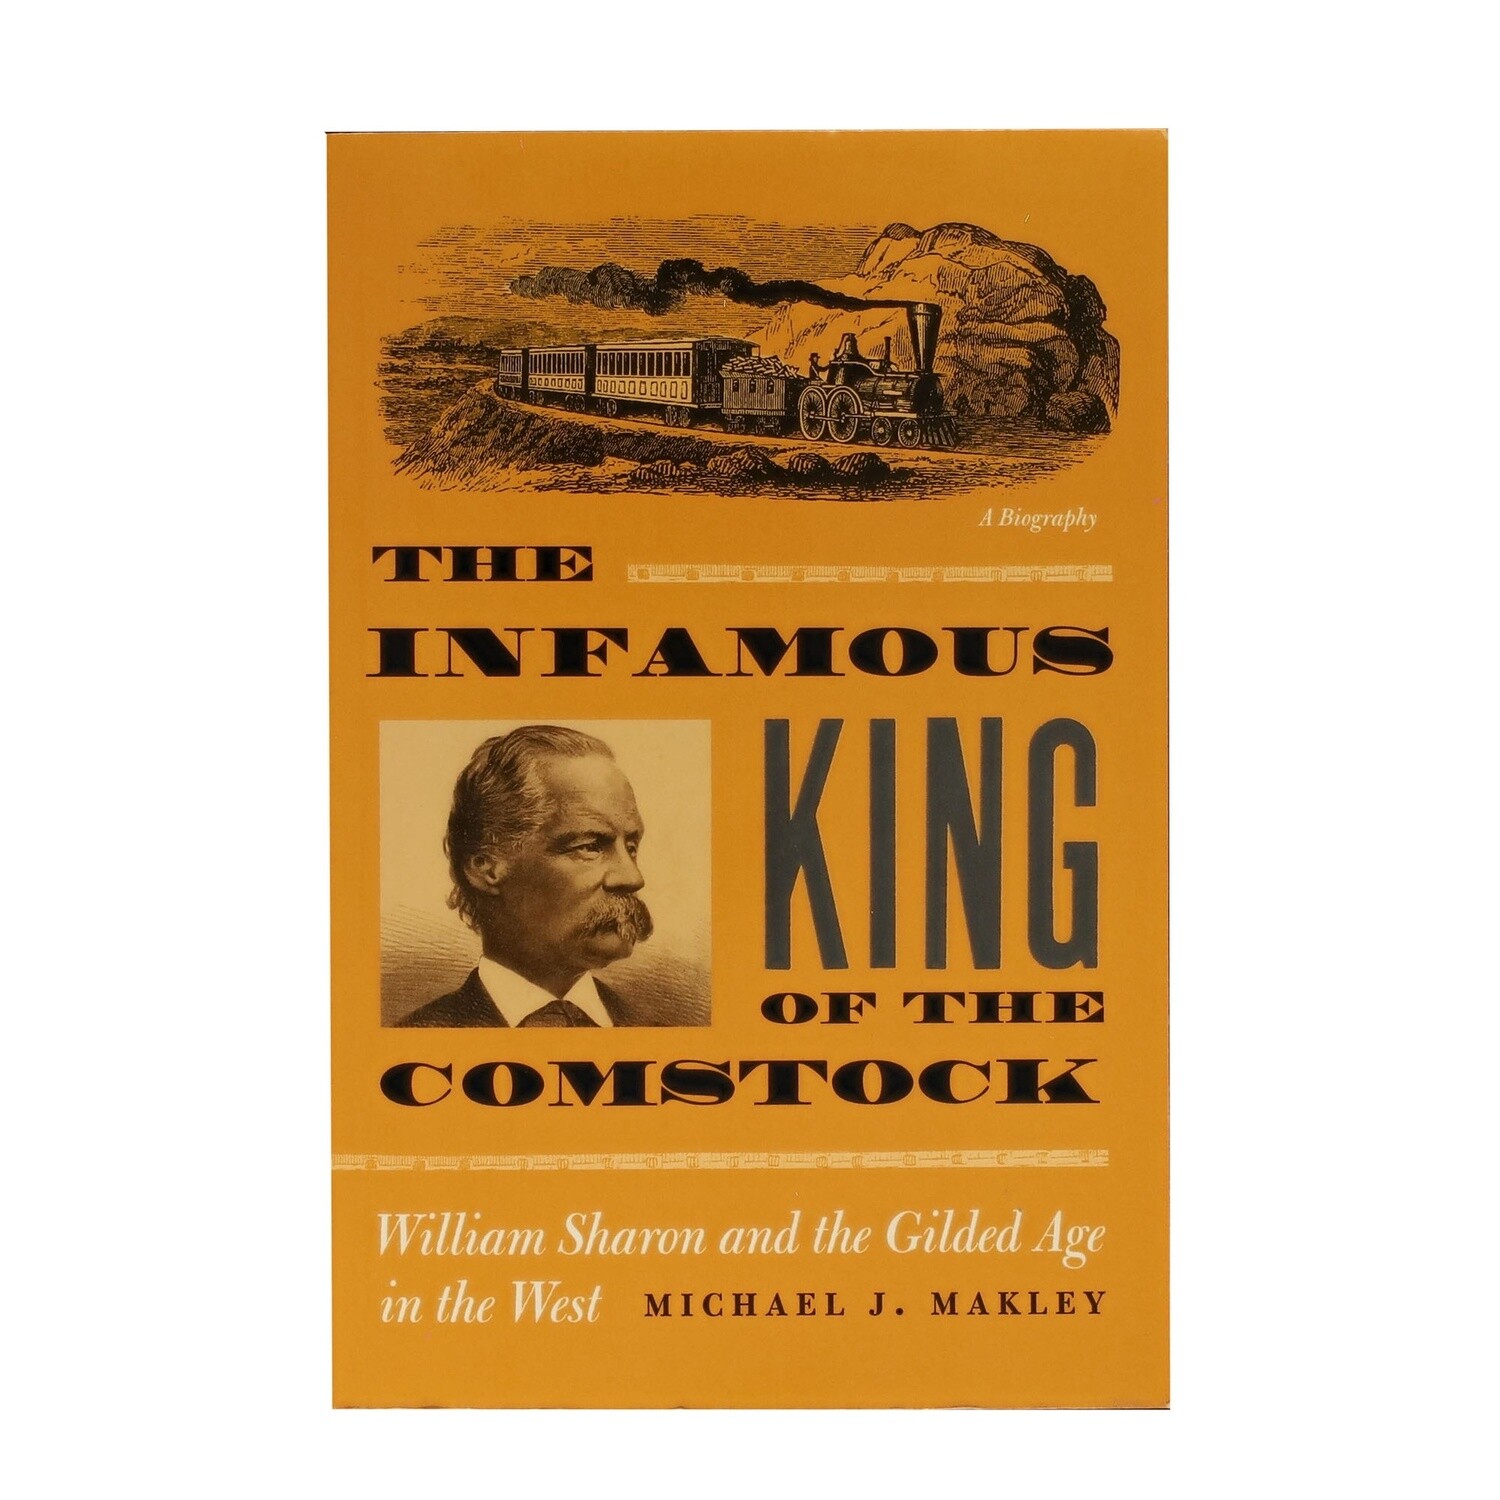 The Infamous King of the Comstock by Michael J. Makley